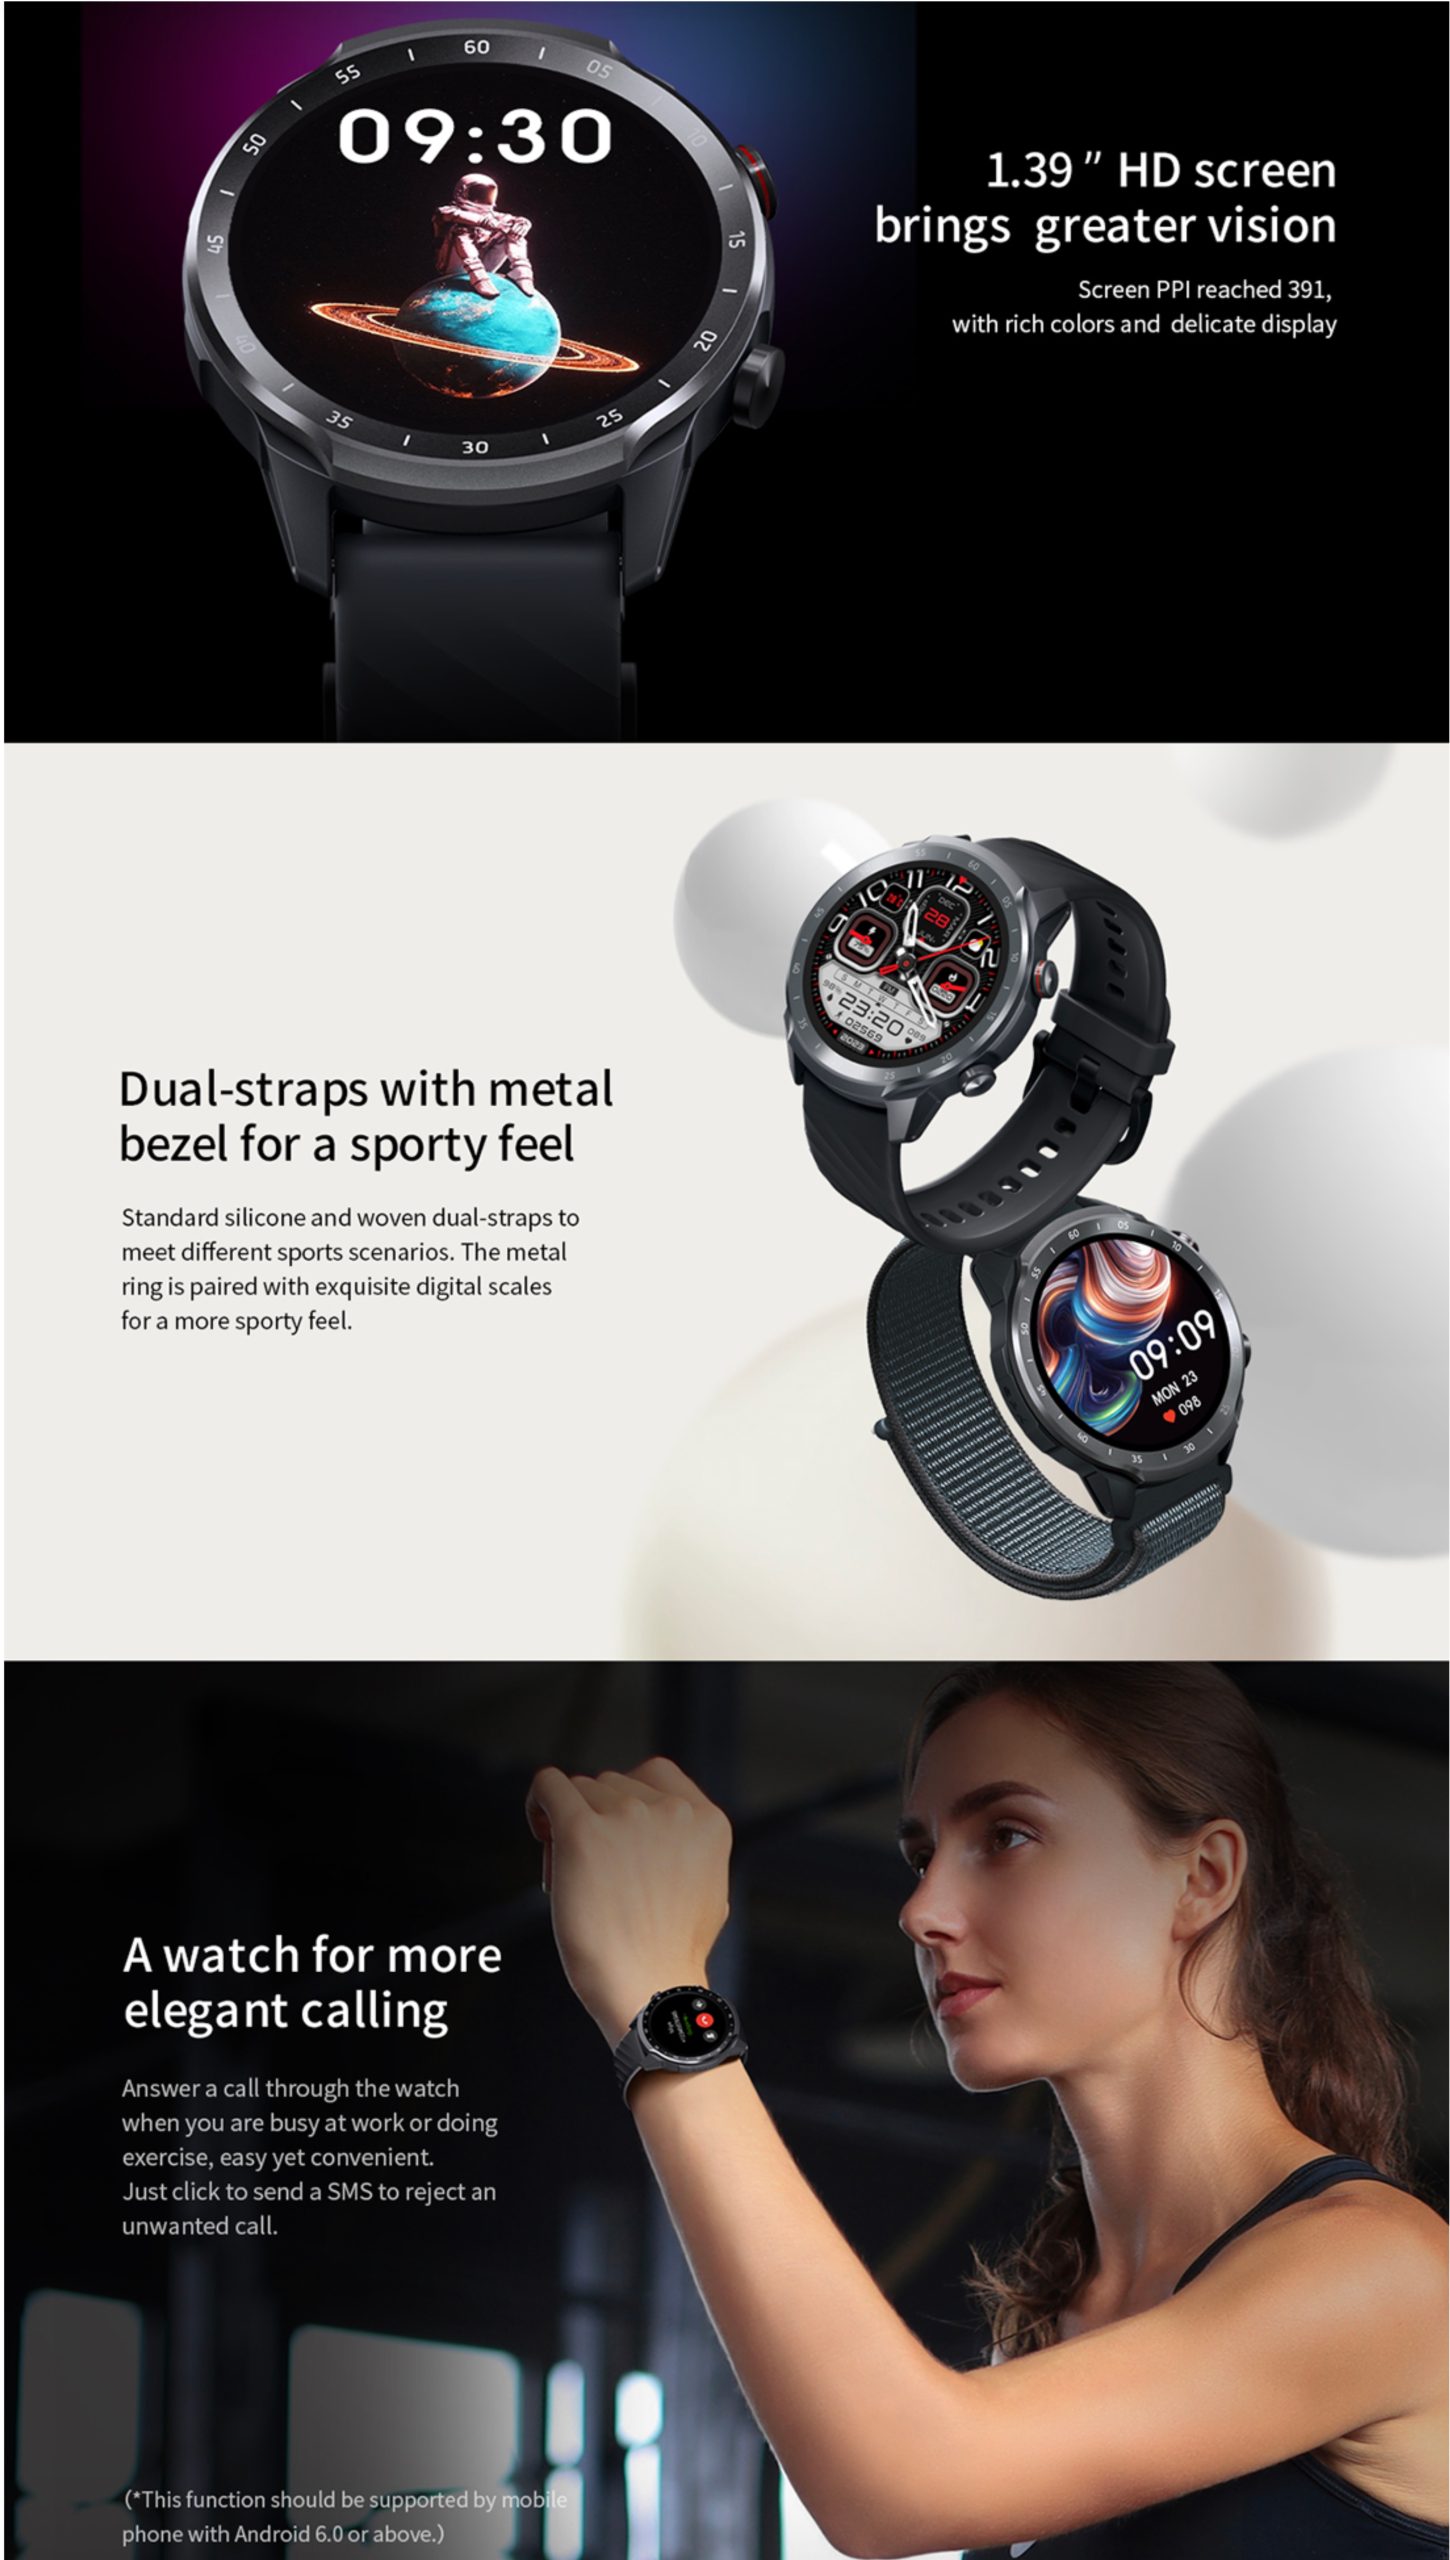 Mibro A2 Smart Watch Bluetooth Calling Sporty looks 2ATM